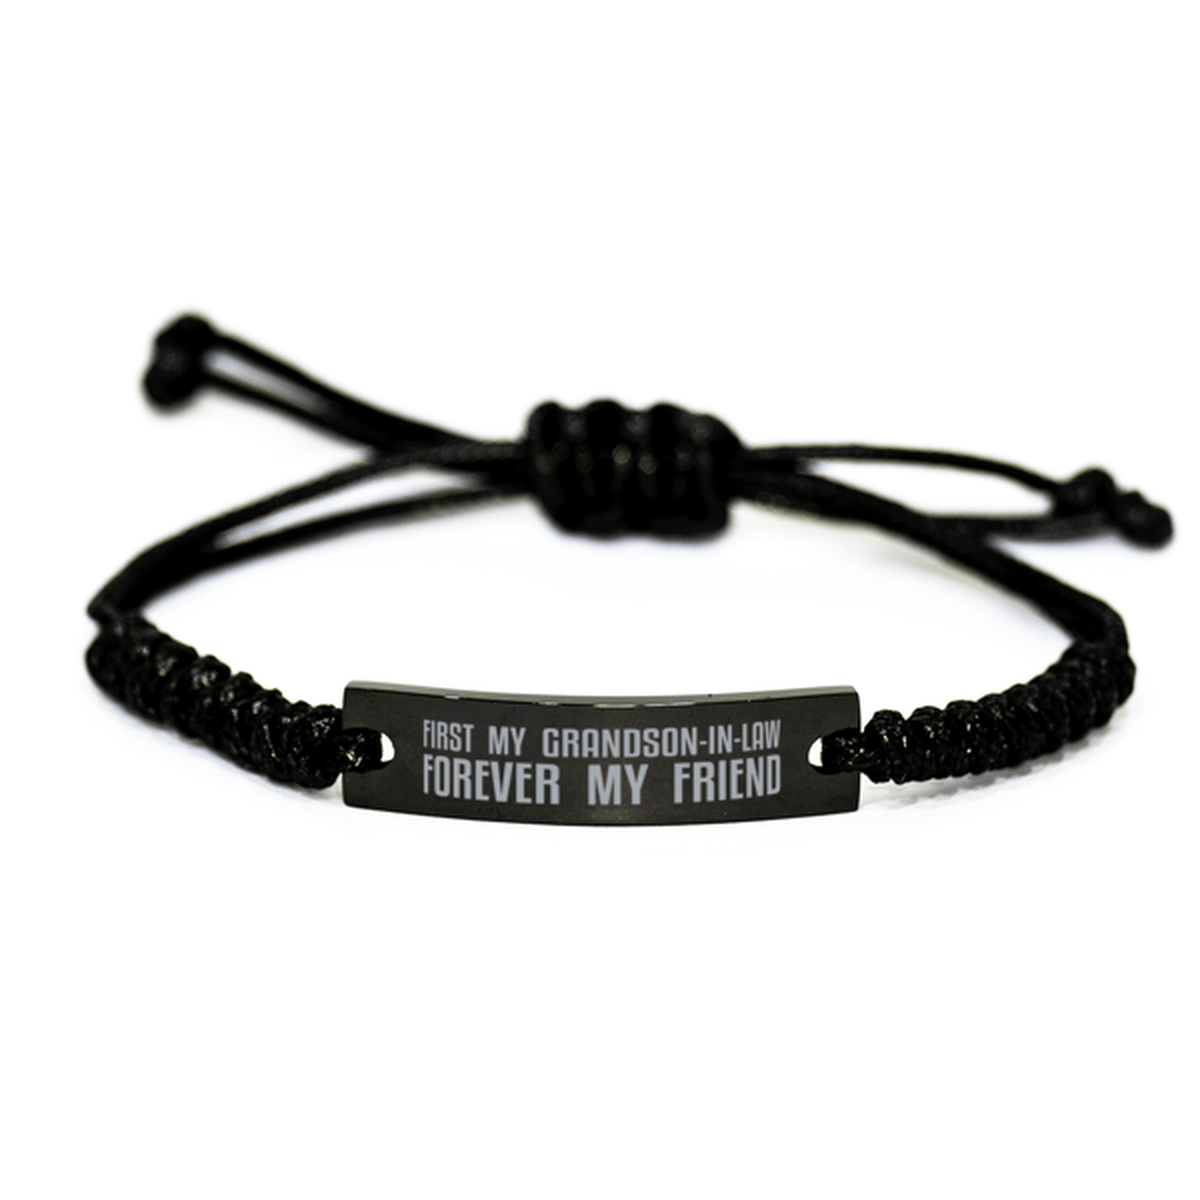 Unique Grandson-in-law Engraved Rope Bracelet, First My Grandson-in-law Forever My Friend, Best Gift for Grandson-in-law Birthday, Christmas